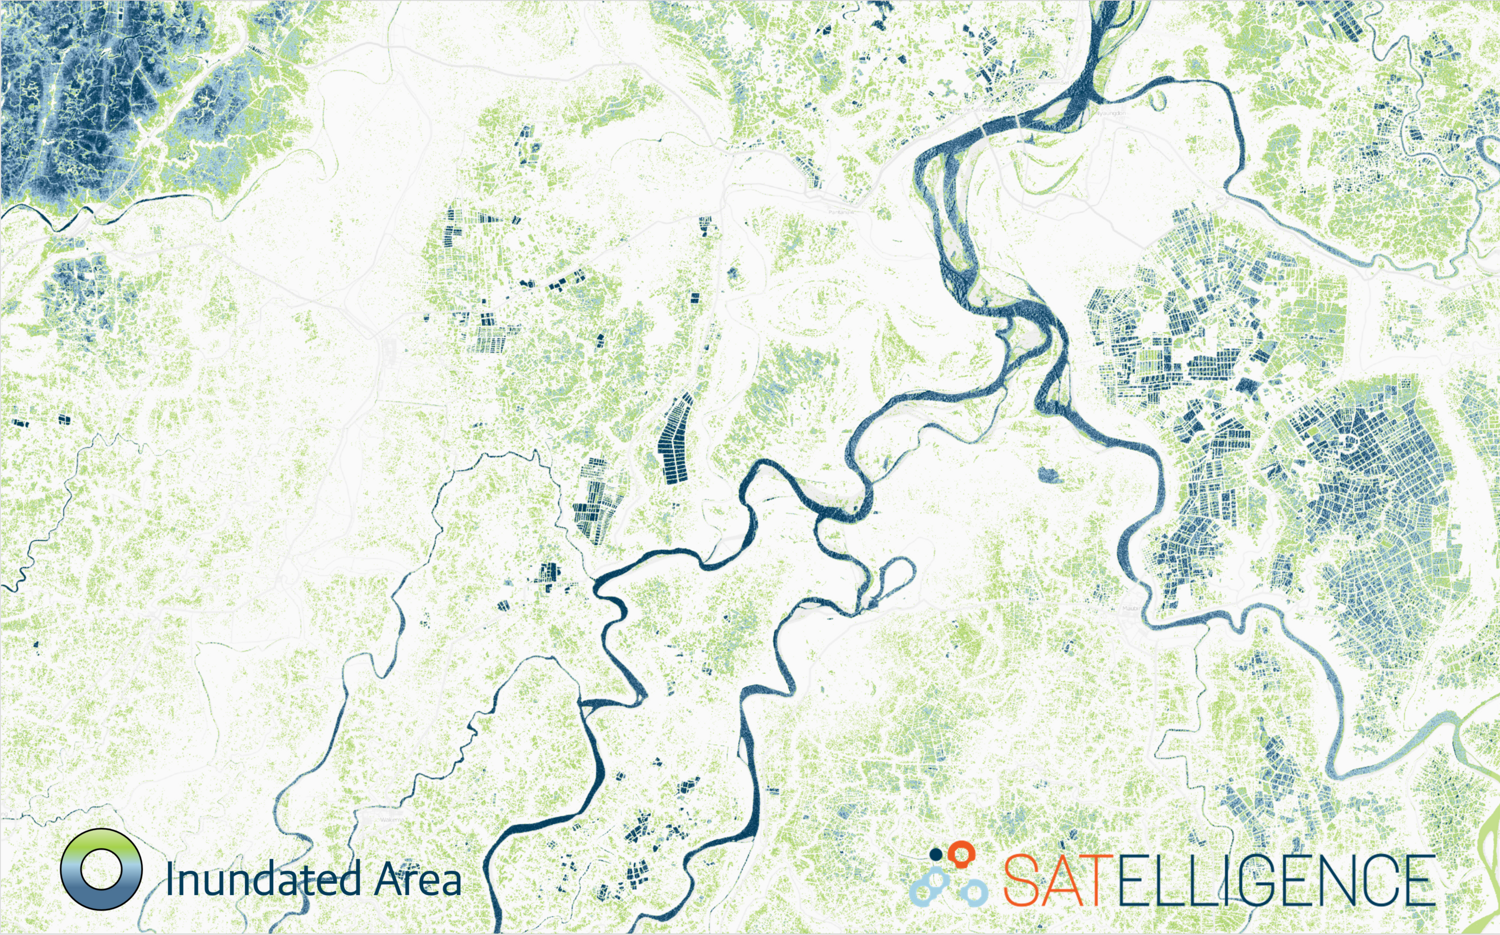 Satelligence has an operational inundation frequency service for large areas all around the world.